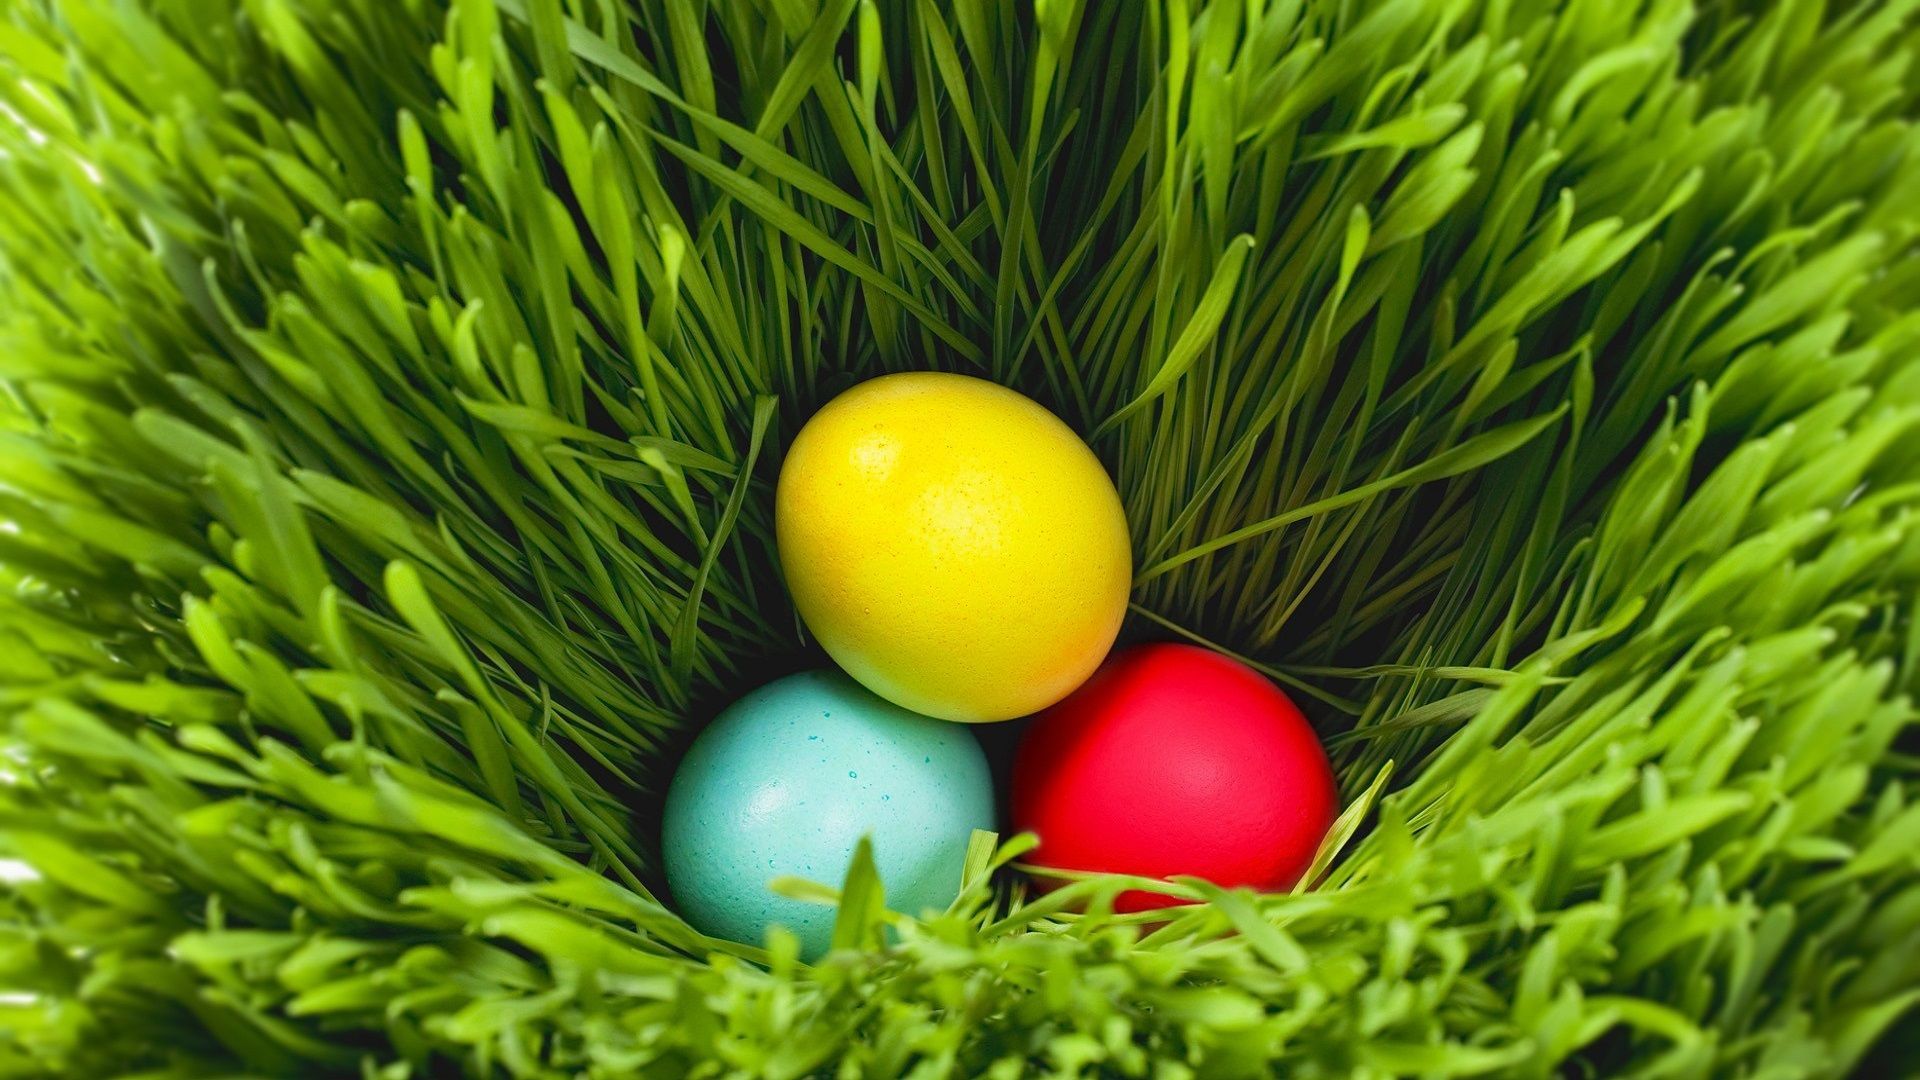 Easter Backgrounds 2016 download free | Wallpapers, Backgrounds ...